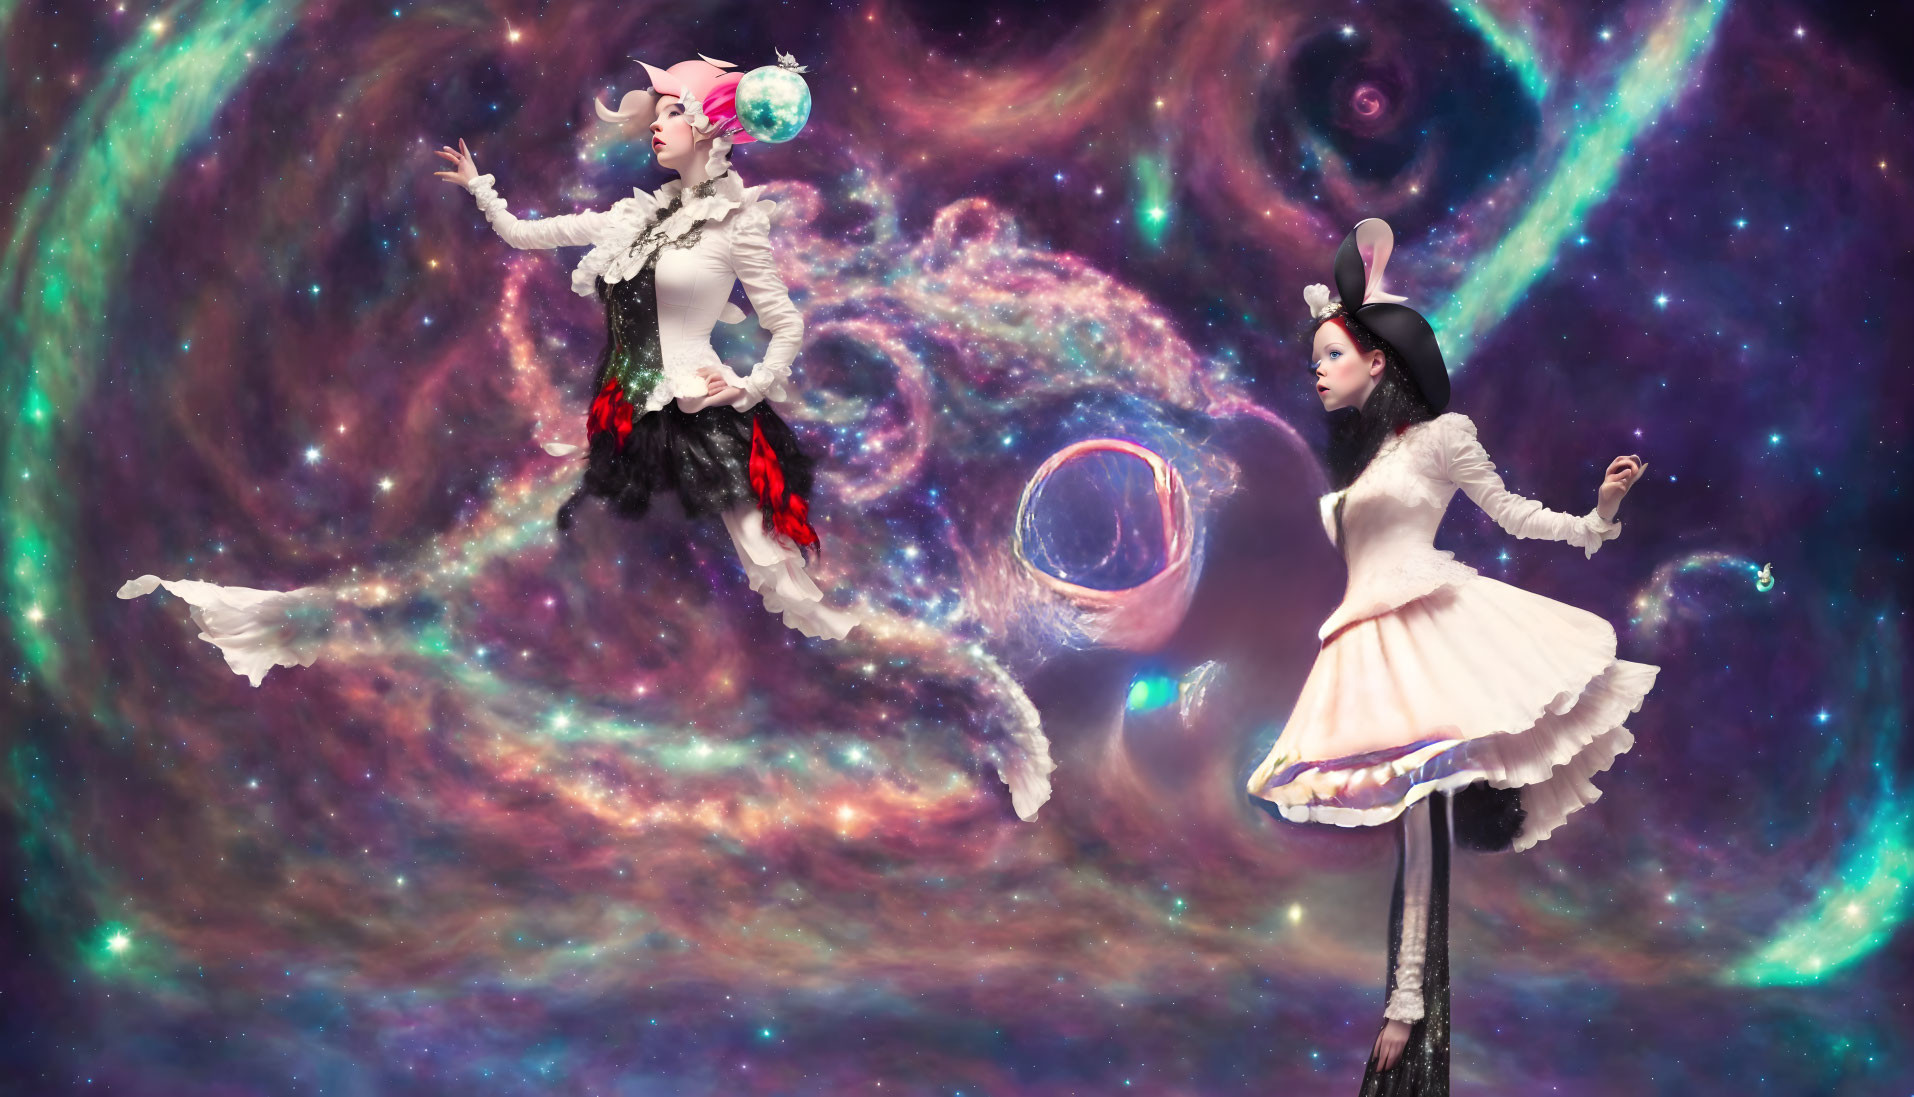 Whimsical rabbit characters in cosmic setting with vibrant galaxies